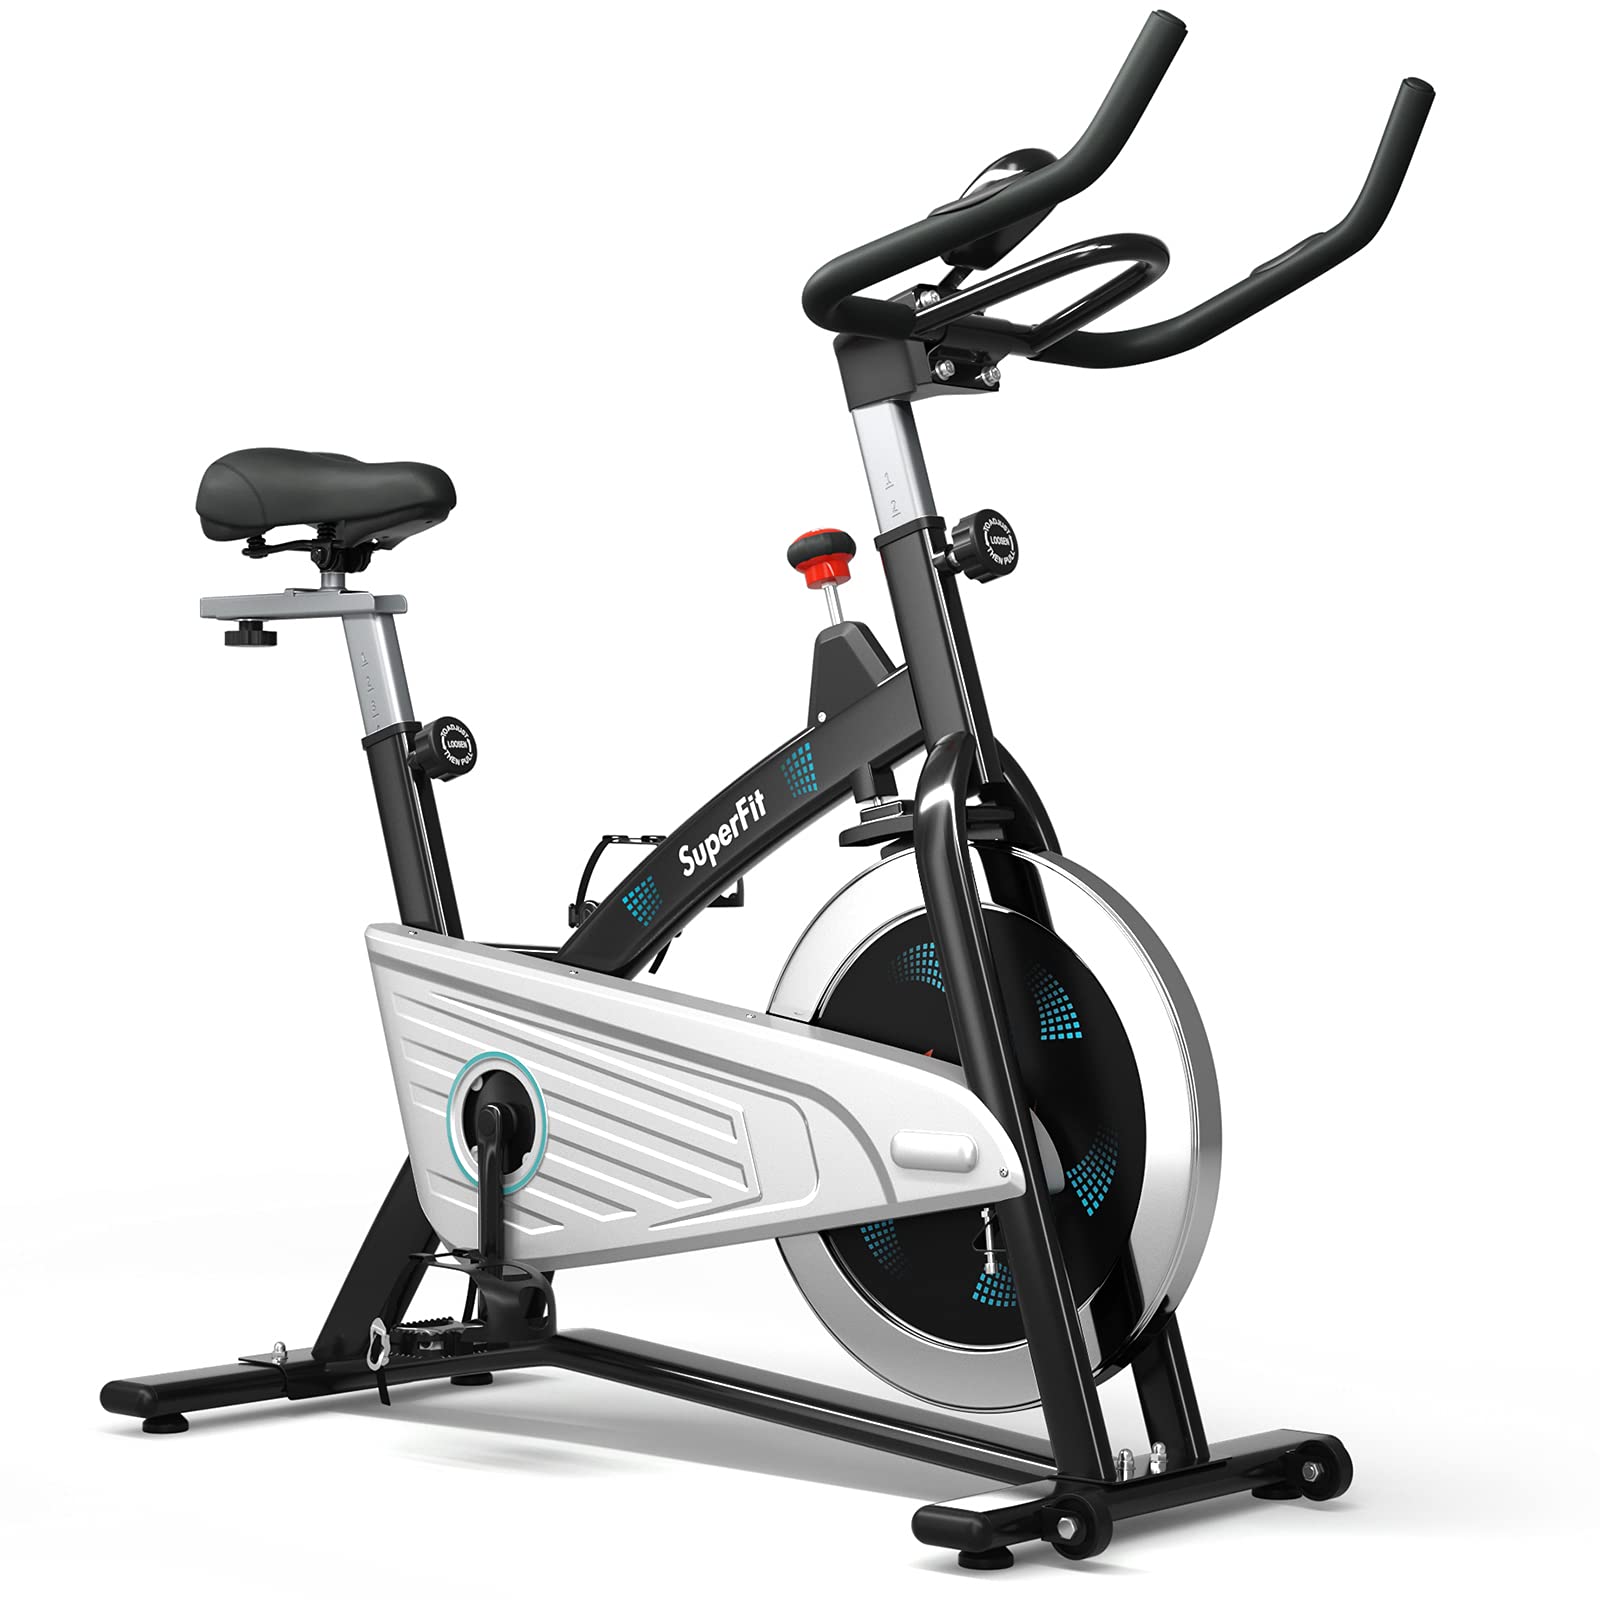 Goplus Magnetic Stationary Bike, Indoor Exercise Cycling Bike Smooth Belt Drive